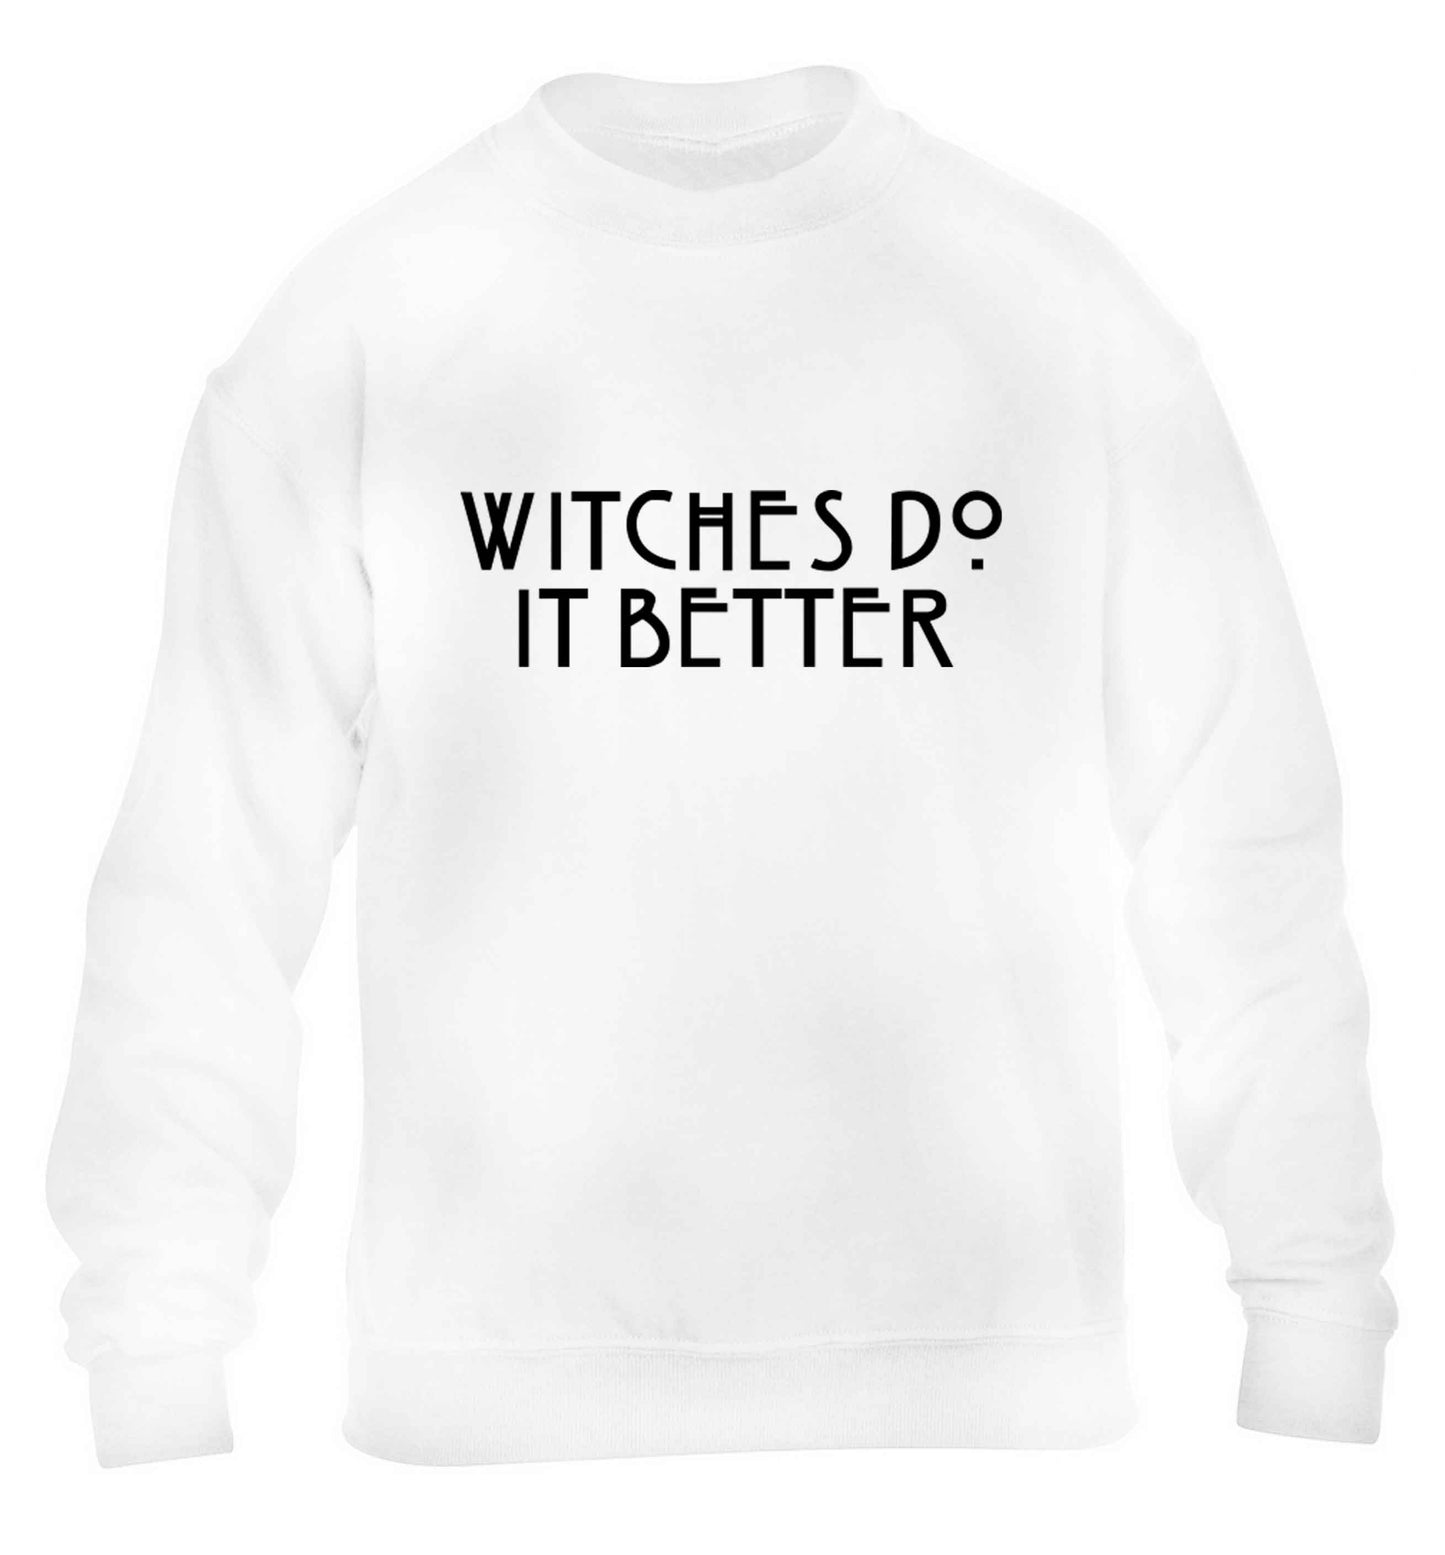 Witches do it better children's white sweater 12-13 Years